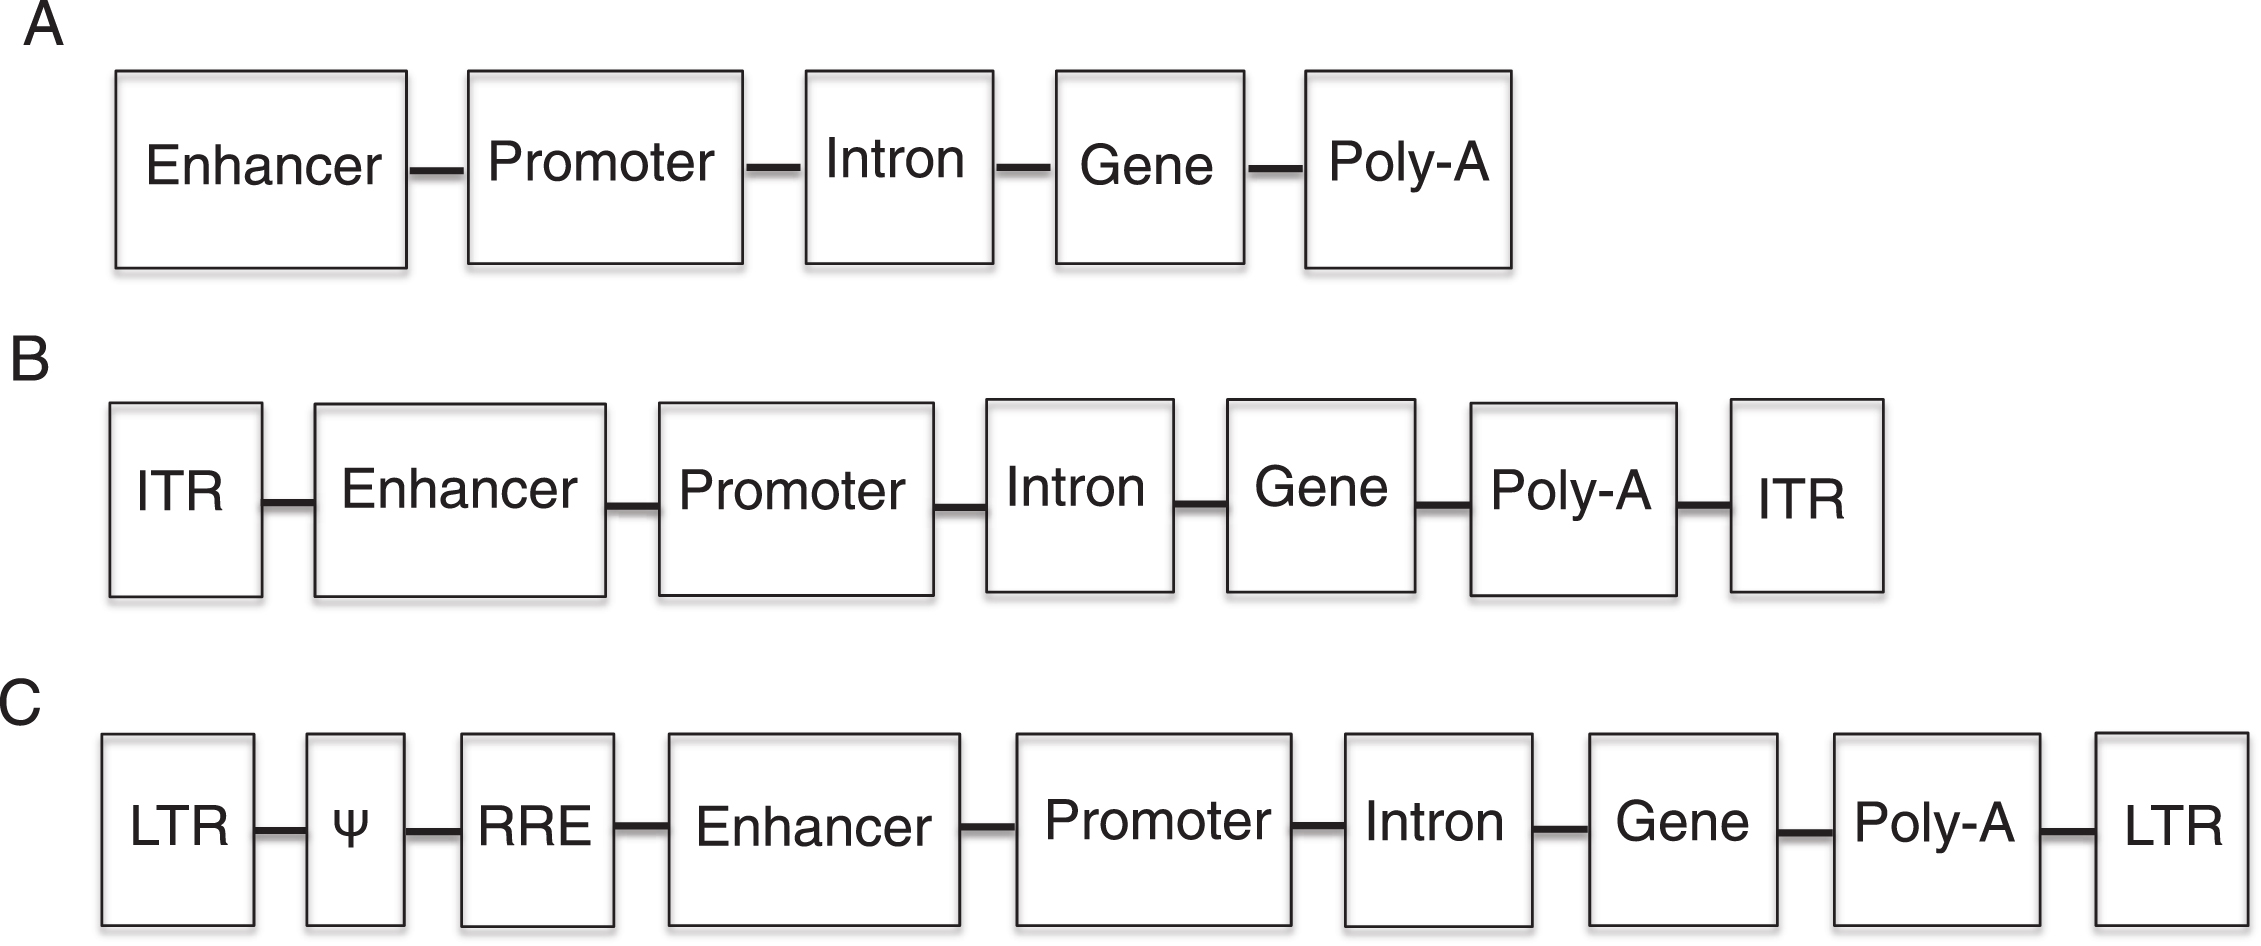 Diagram of therapeutic nucleotide sequences 
(TNS). A. Non-viral TNS have an enhancer (optional) for increased transgene expression, a promoter (necessary) to 
drive transgene expression, an intron (optional) for increase gene expression, a transgene to correct the genetic 
defect and a polyadenylation (poly-A) signal (necessary) for proper translation. B. Adeno-associated virus TNS 
contain all the elements of non-viral TNS as well as inverted terminal repeats (ITR), which are necessary for the 
packaging of the TNS into the virus. C. Retroviral TNS contain the elements necessary for proper transgene 
expression, and retroviral elements and coding sequences. The Ψ element is a retroviral packaging signal. 
The retroviral long terminal repeats (LTR) mediated integration of retroviral DNA and have promoter activity, 
which is sometimes inactivated to prevent insertional mutagenesis. The rev-responsive element (RRE) is necessary 
for post-transcriptional transport of viral RNA during retroviral packaging.